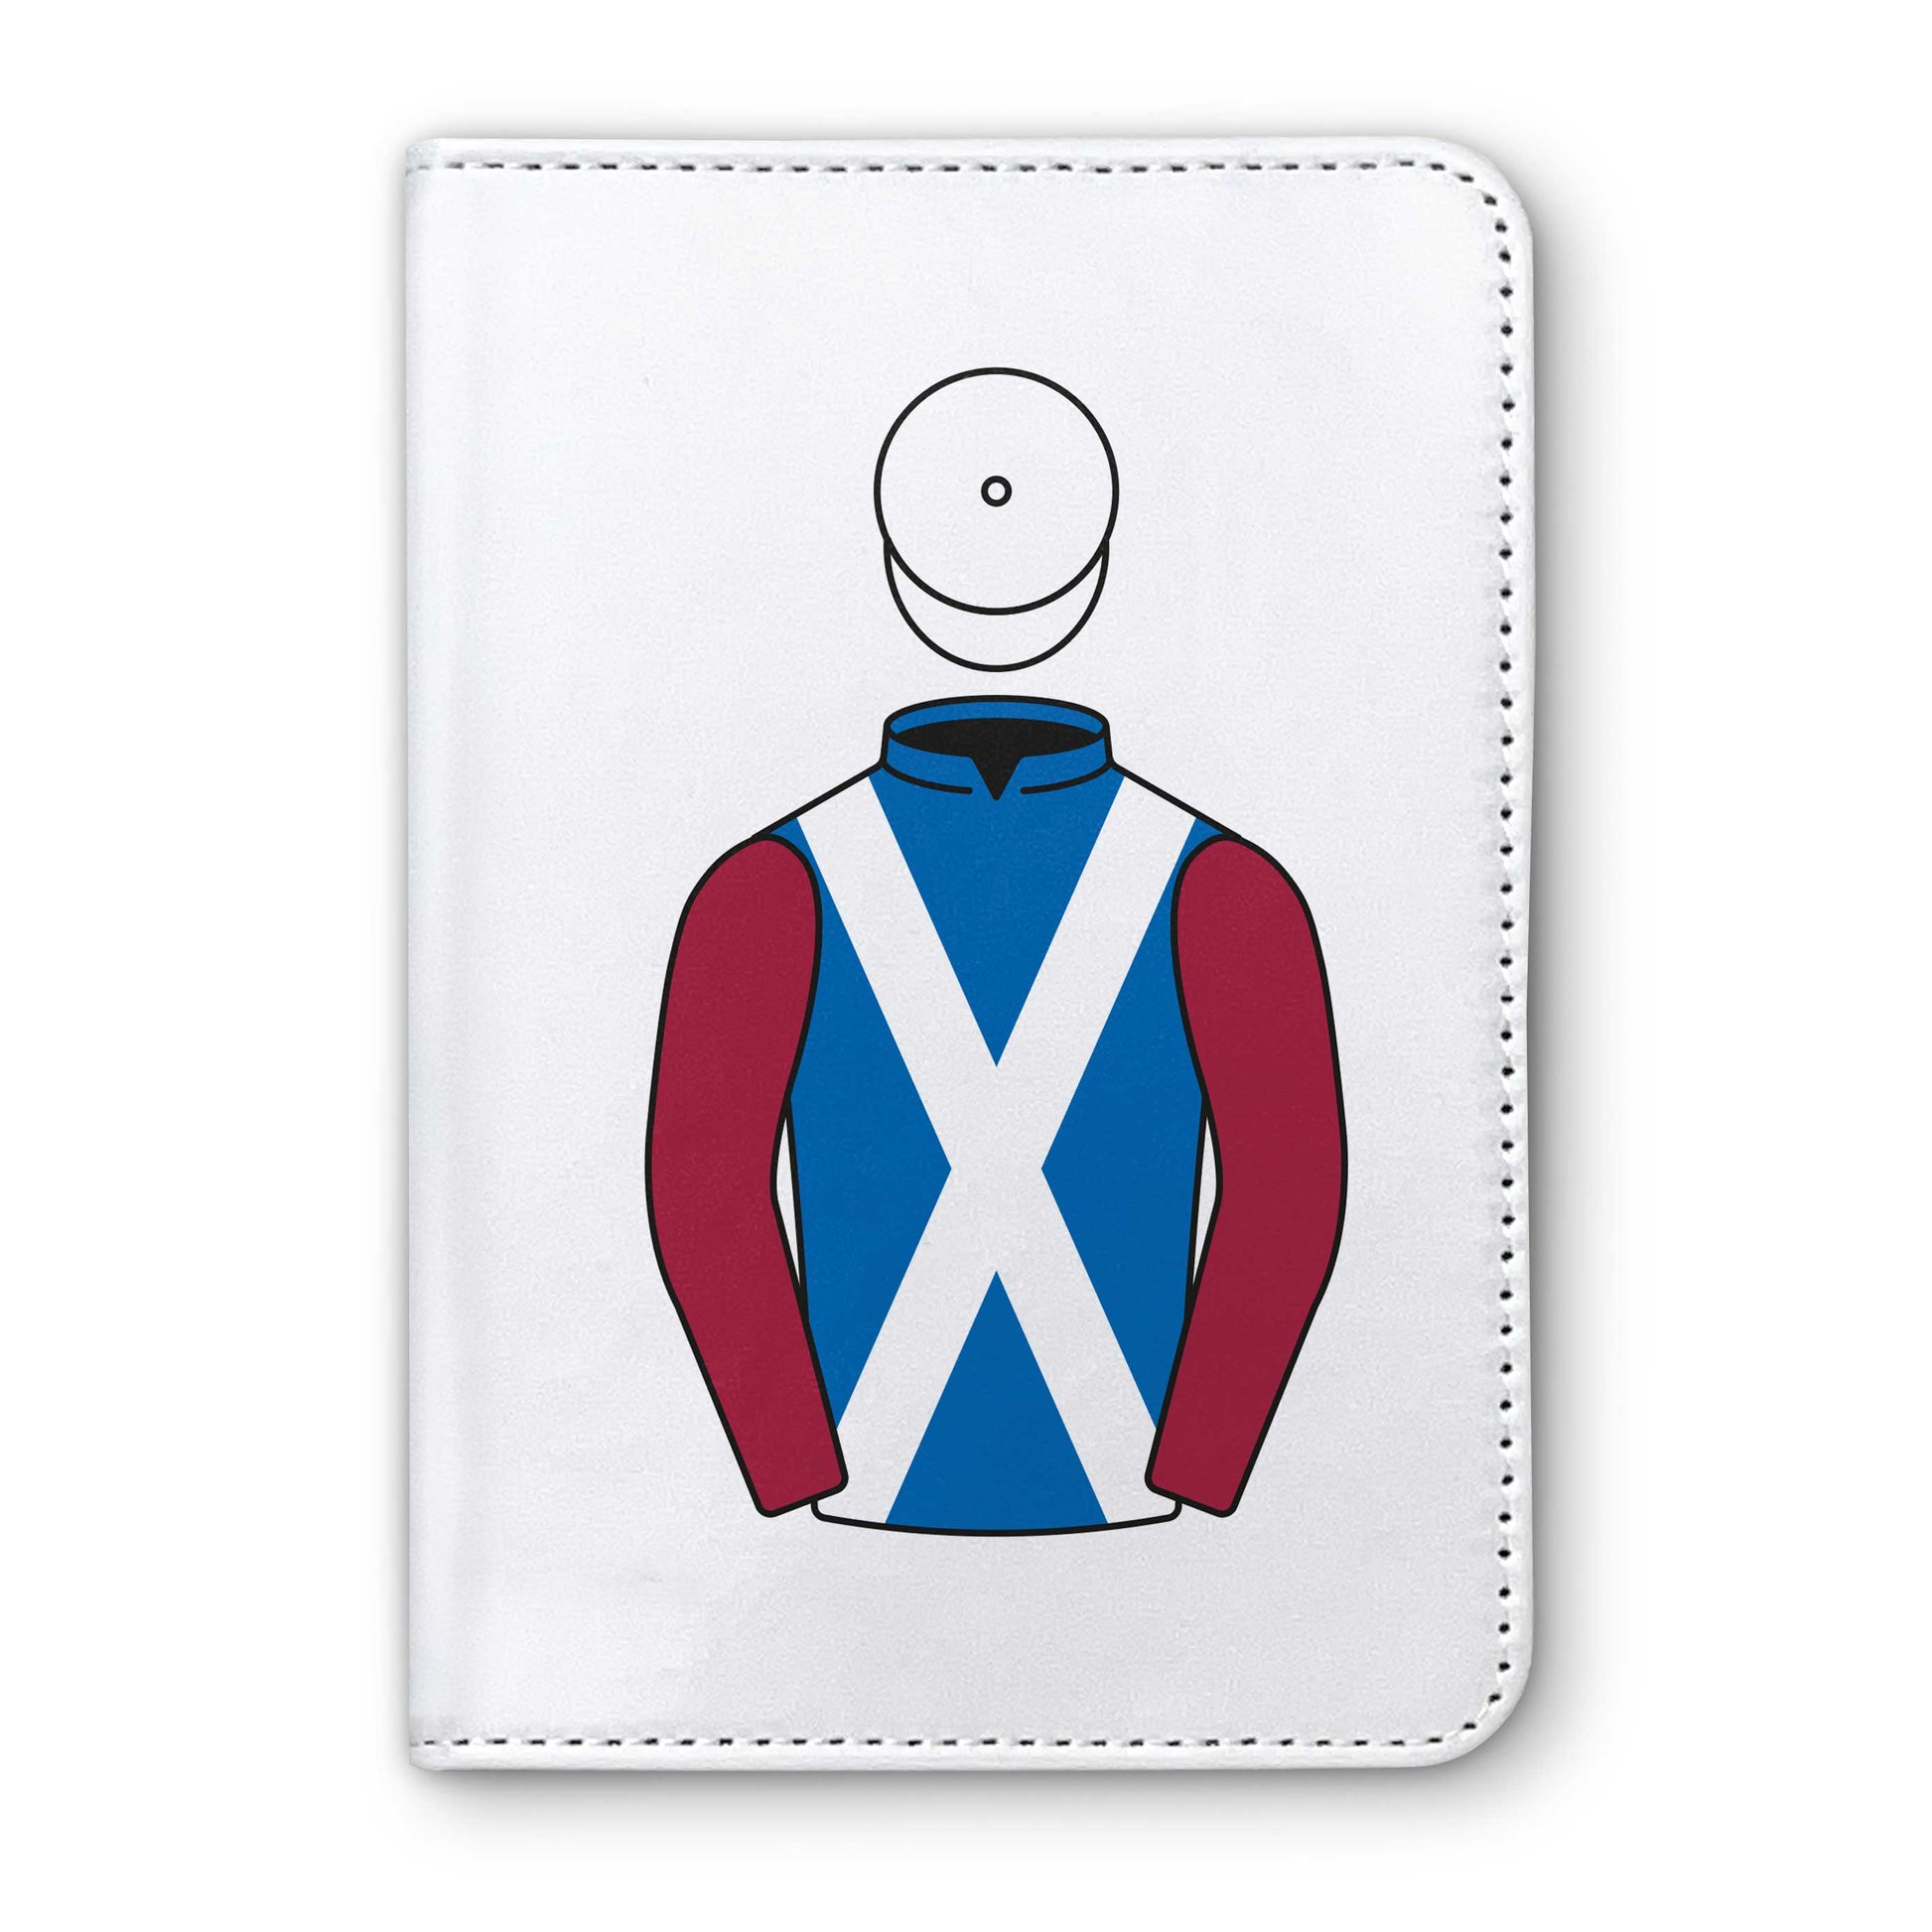 Two Golf Widows Horse Racing Passport Holder - Hacked Up Horse Racing Gifts